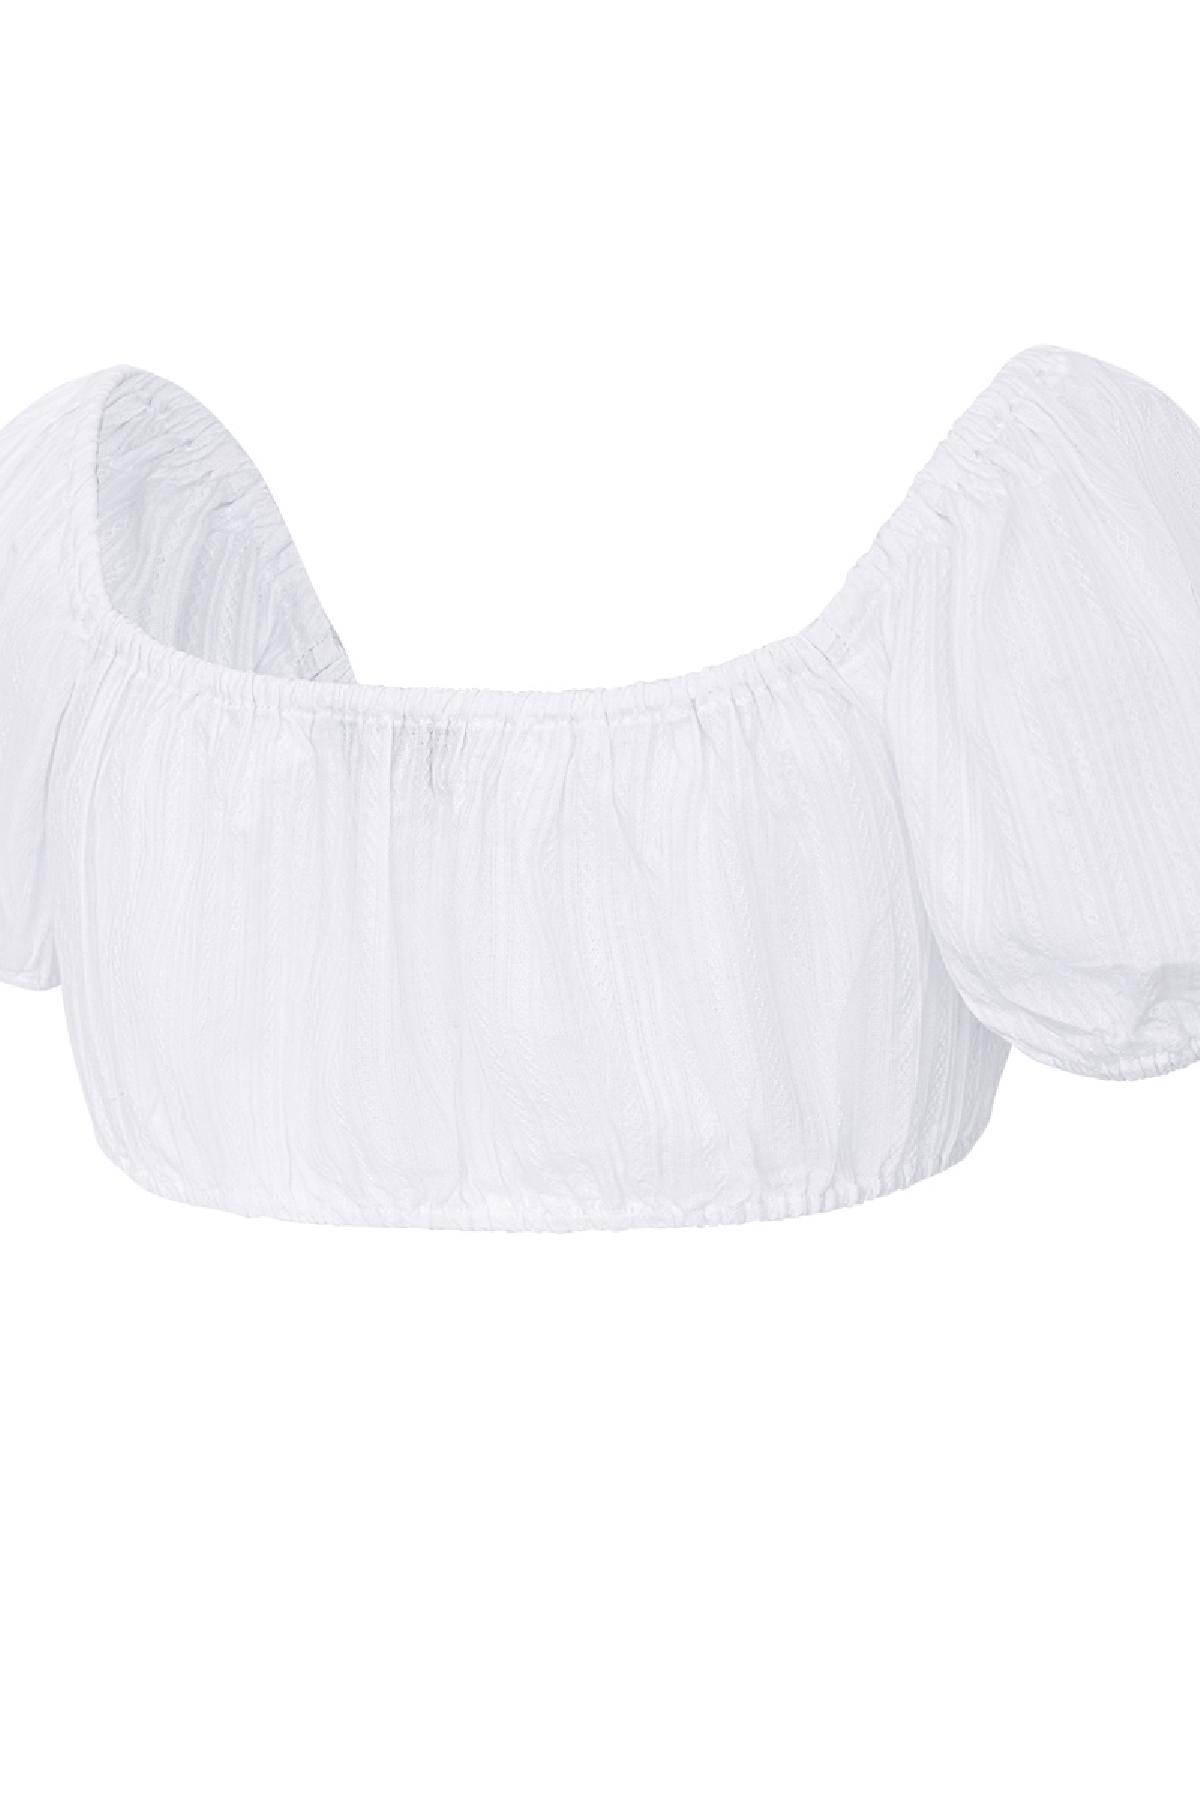 Crop top knotted White L h5 Picture6